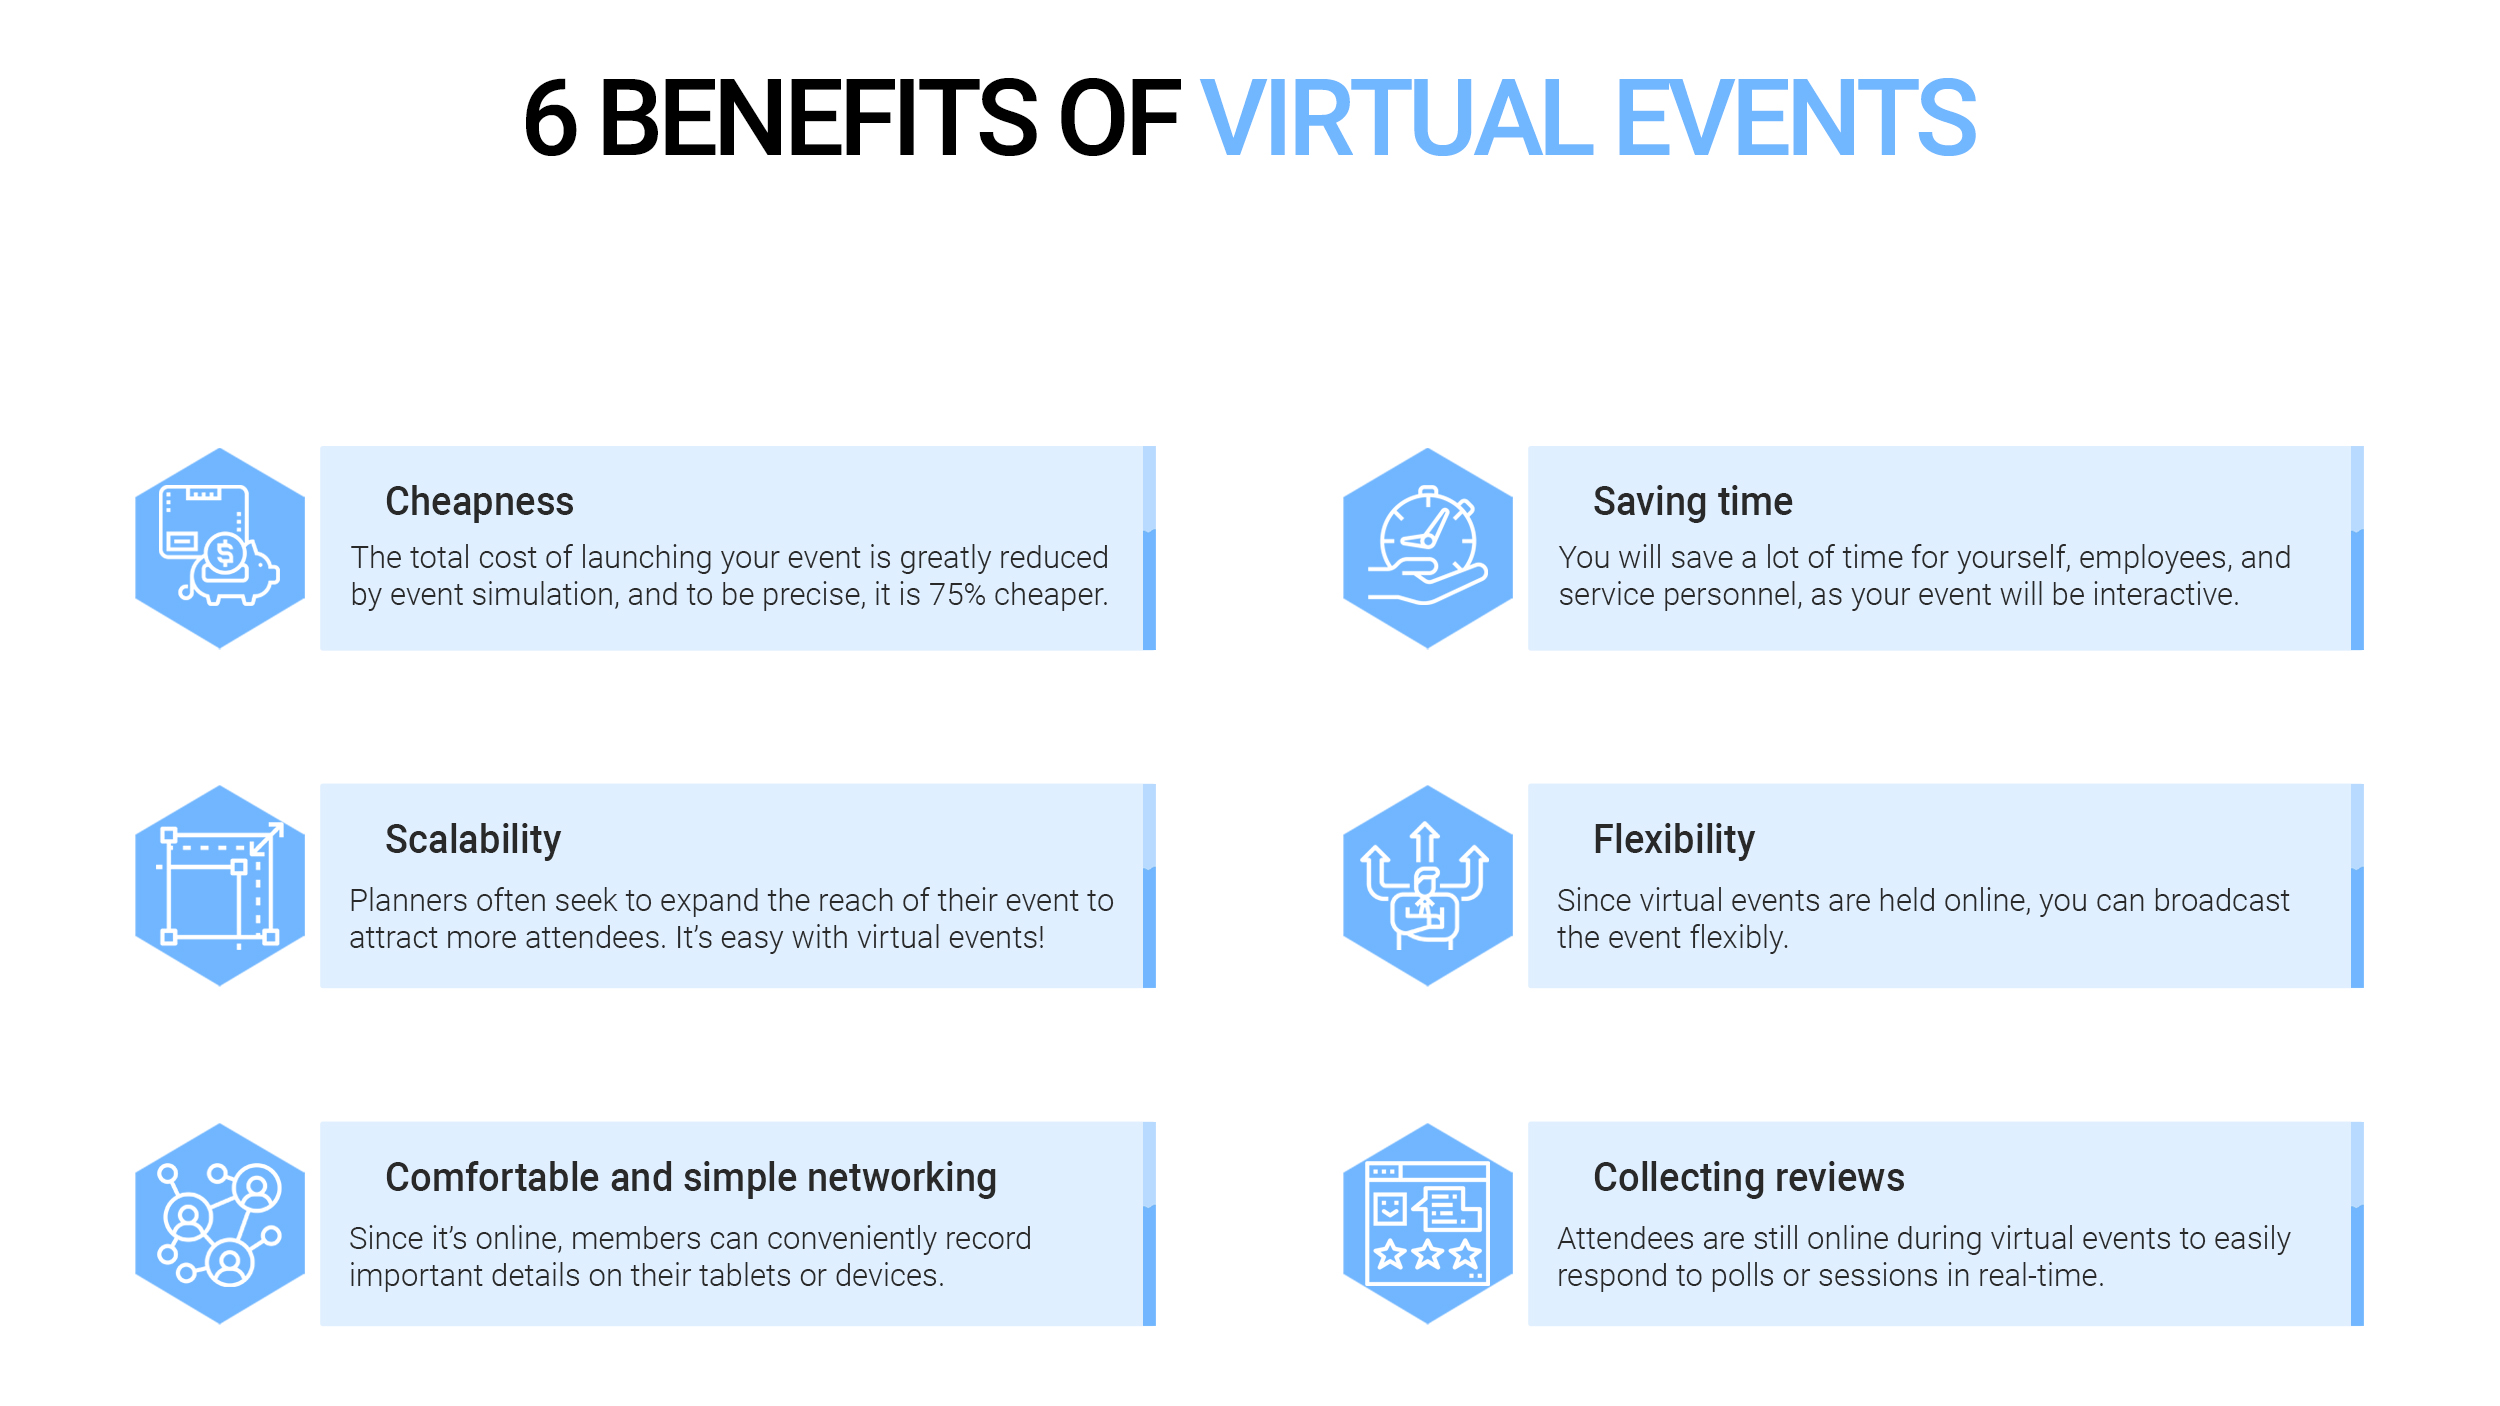 6 Benefits of Virtual Events